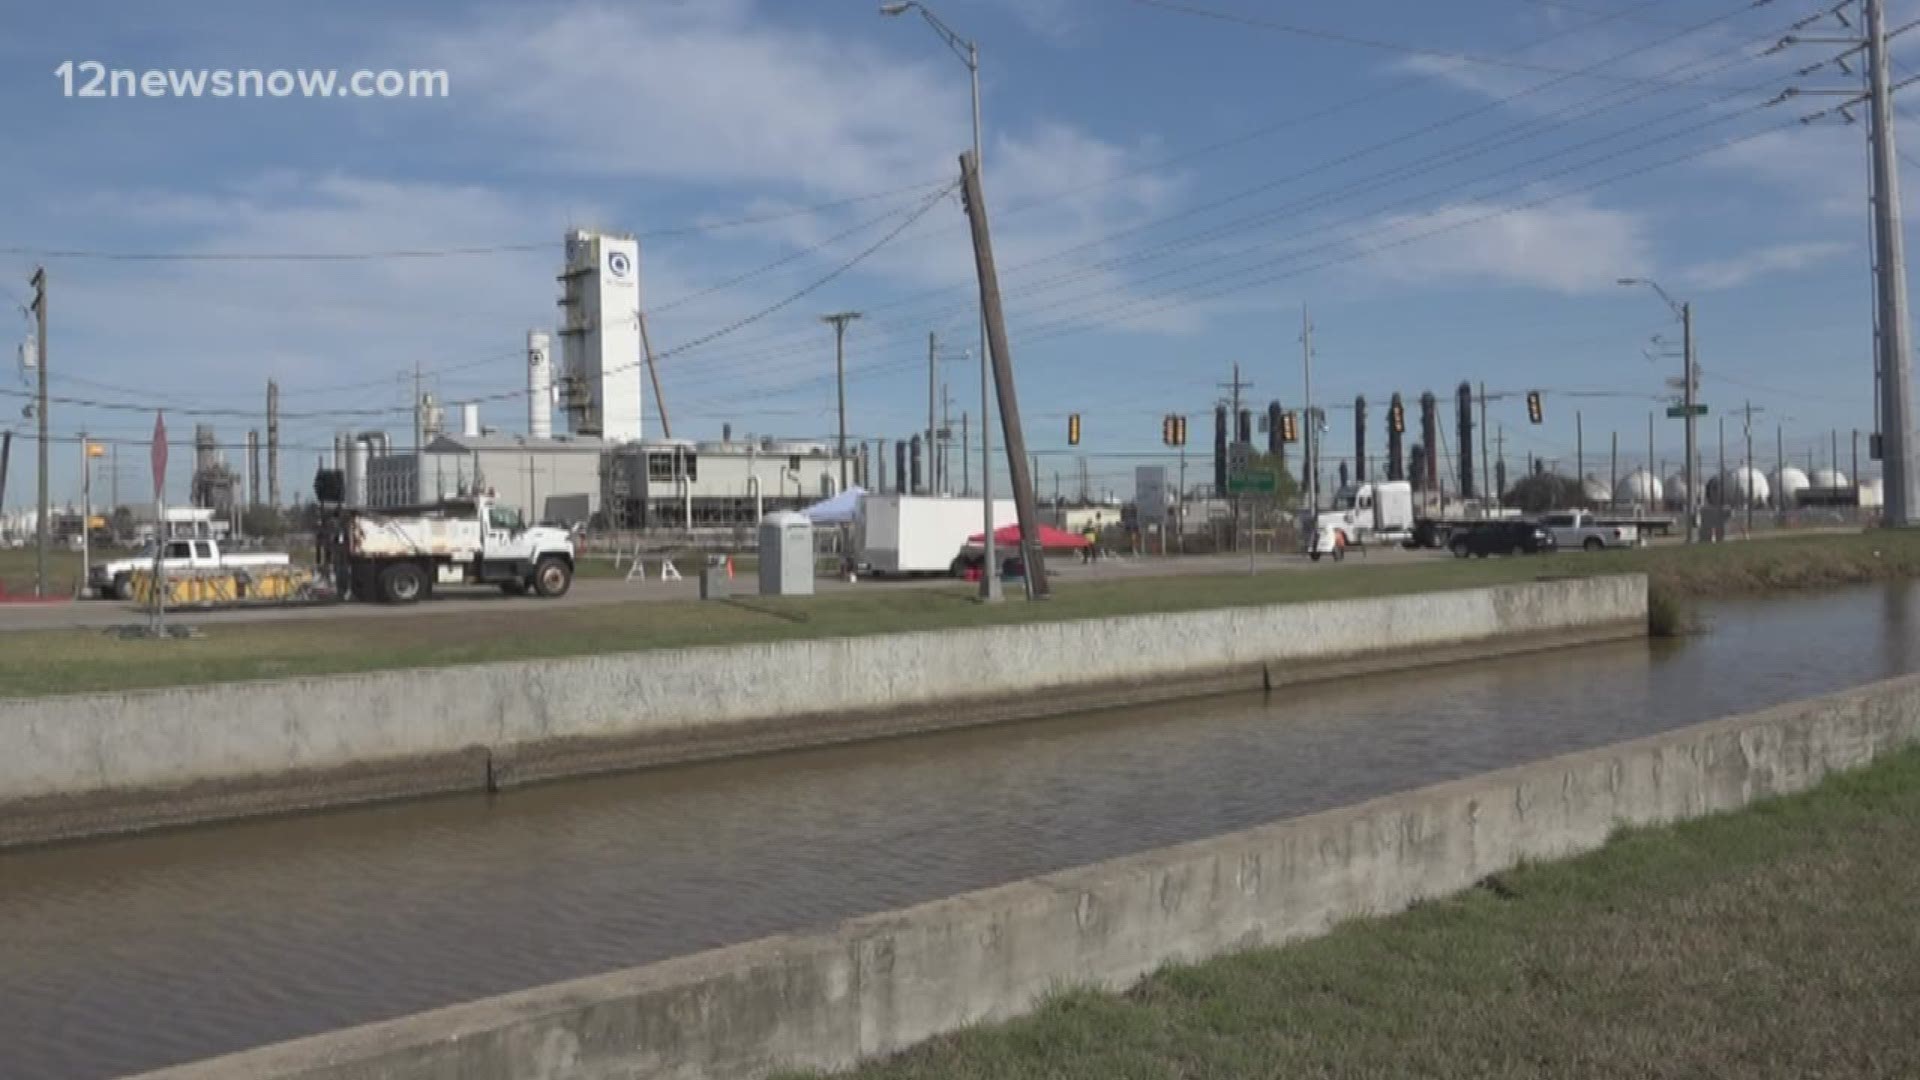 Port Neches residents will be hearing some loud noises for the next 4-5 days. The company sent out a notice they are testing to return to normal operations.